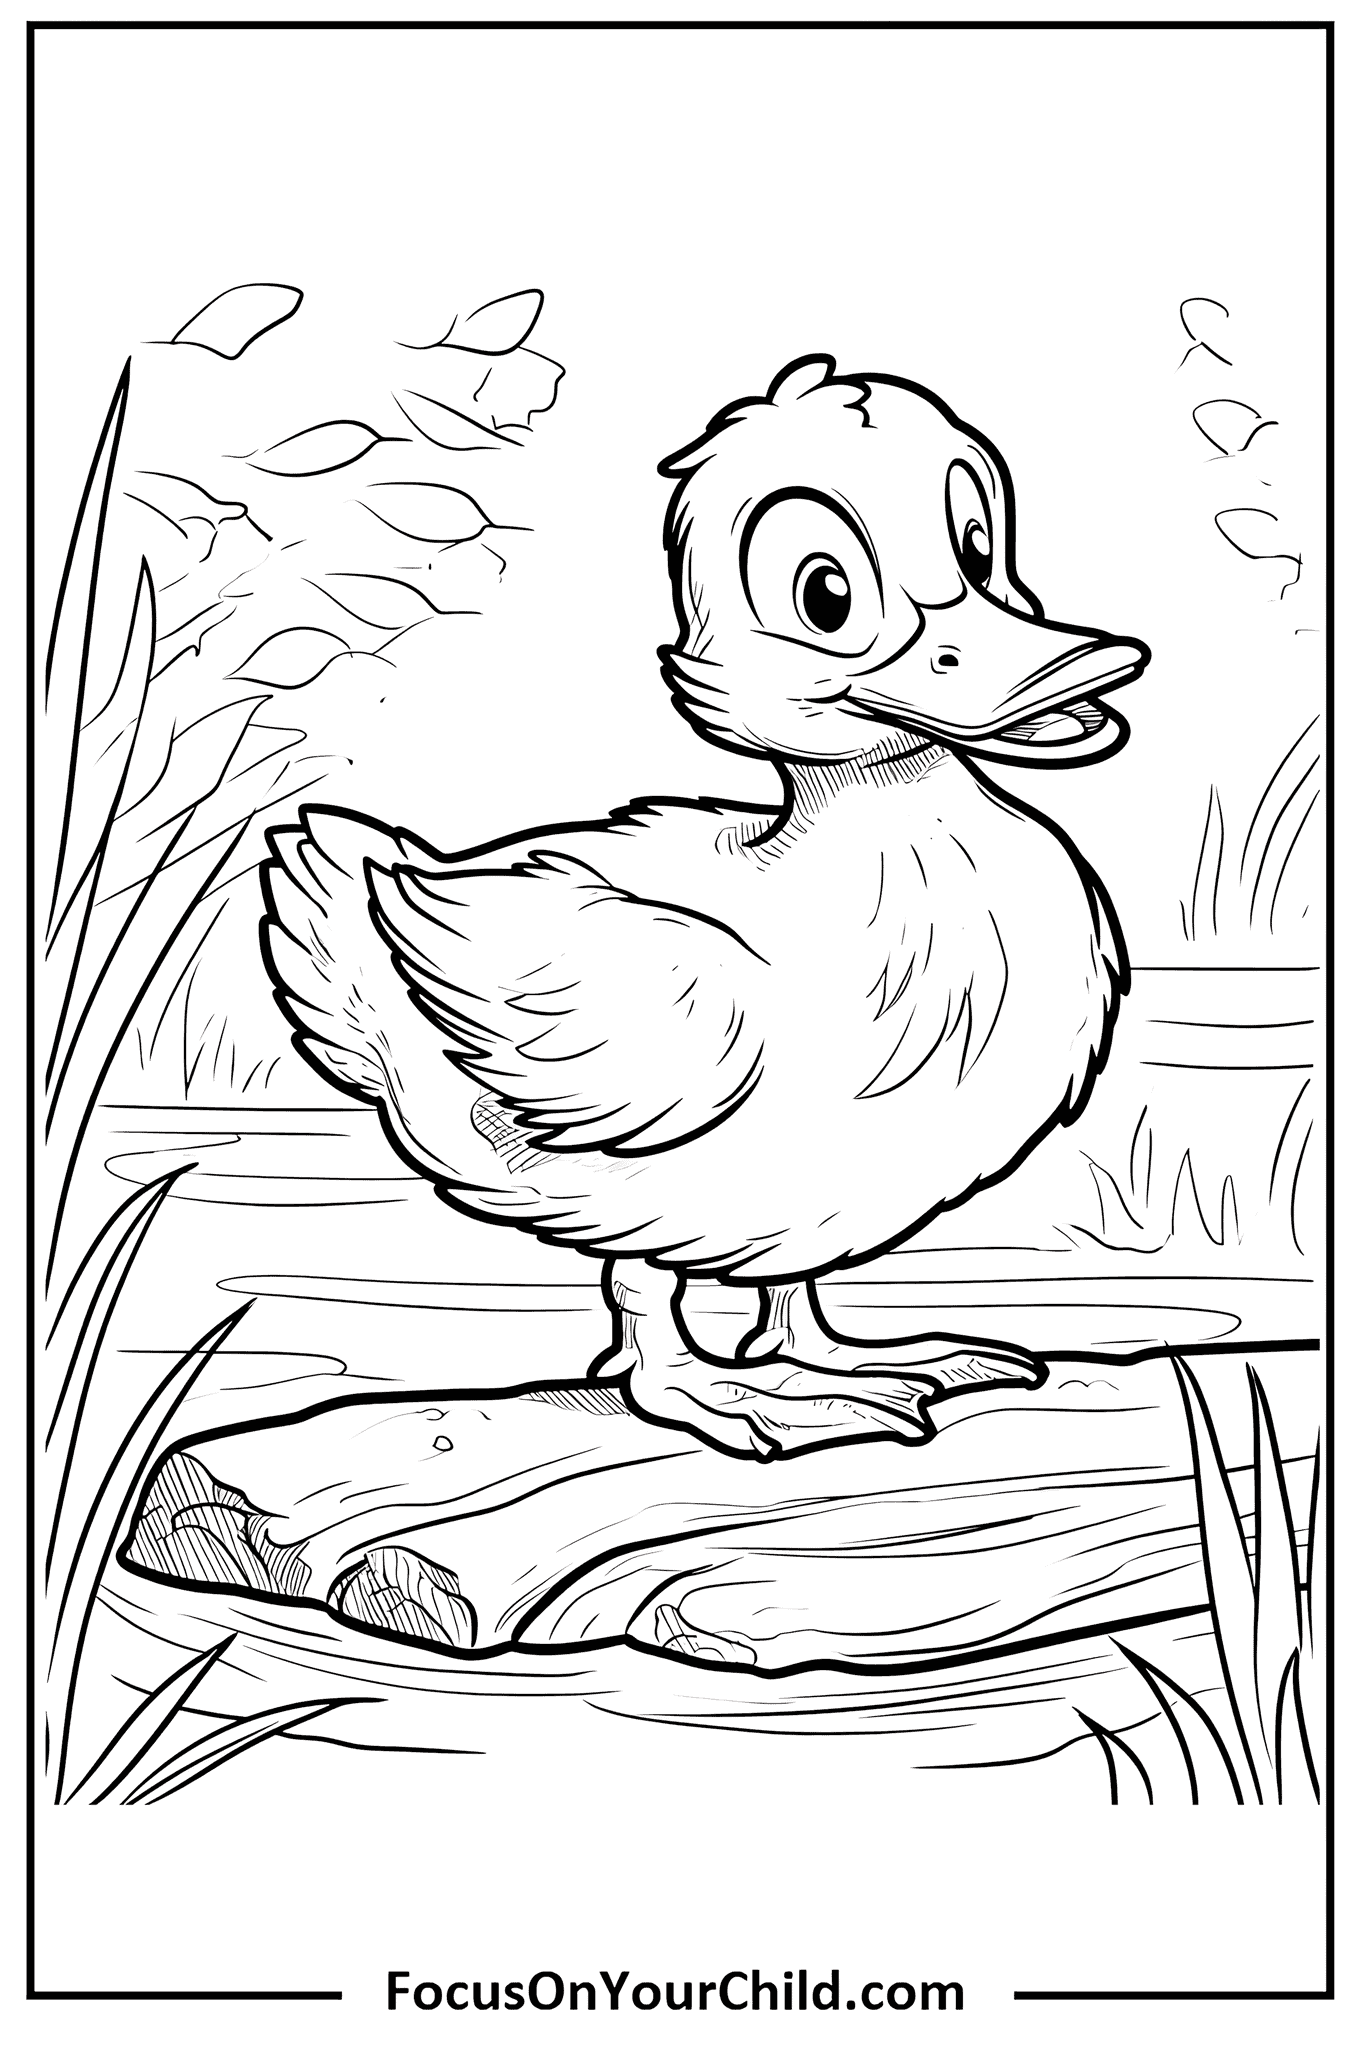 Young duck standing on wooden plank in natural habitat, ready for coloring activity.